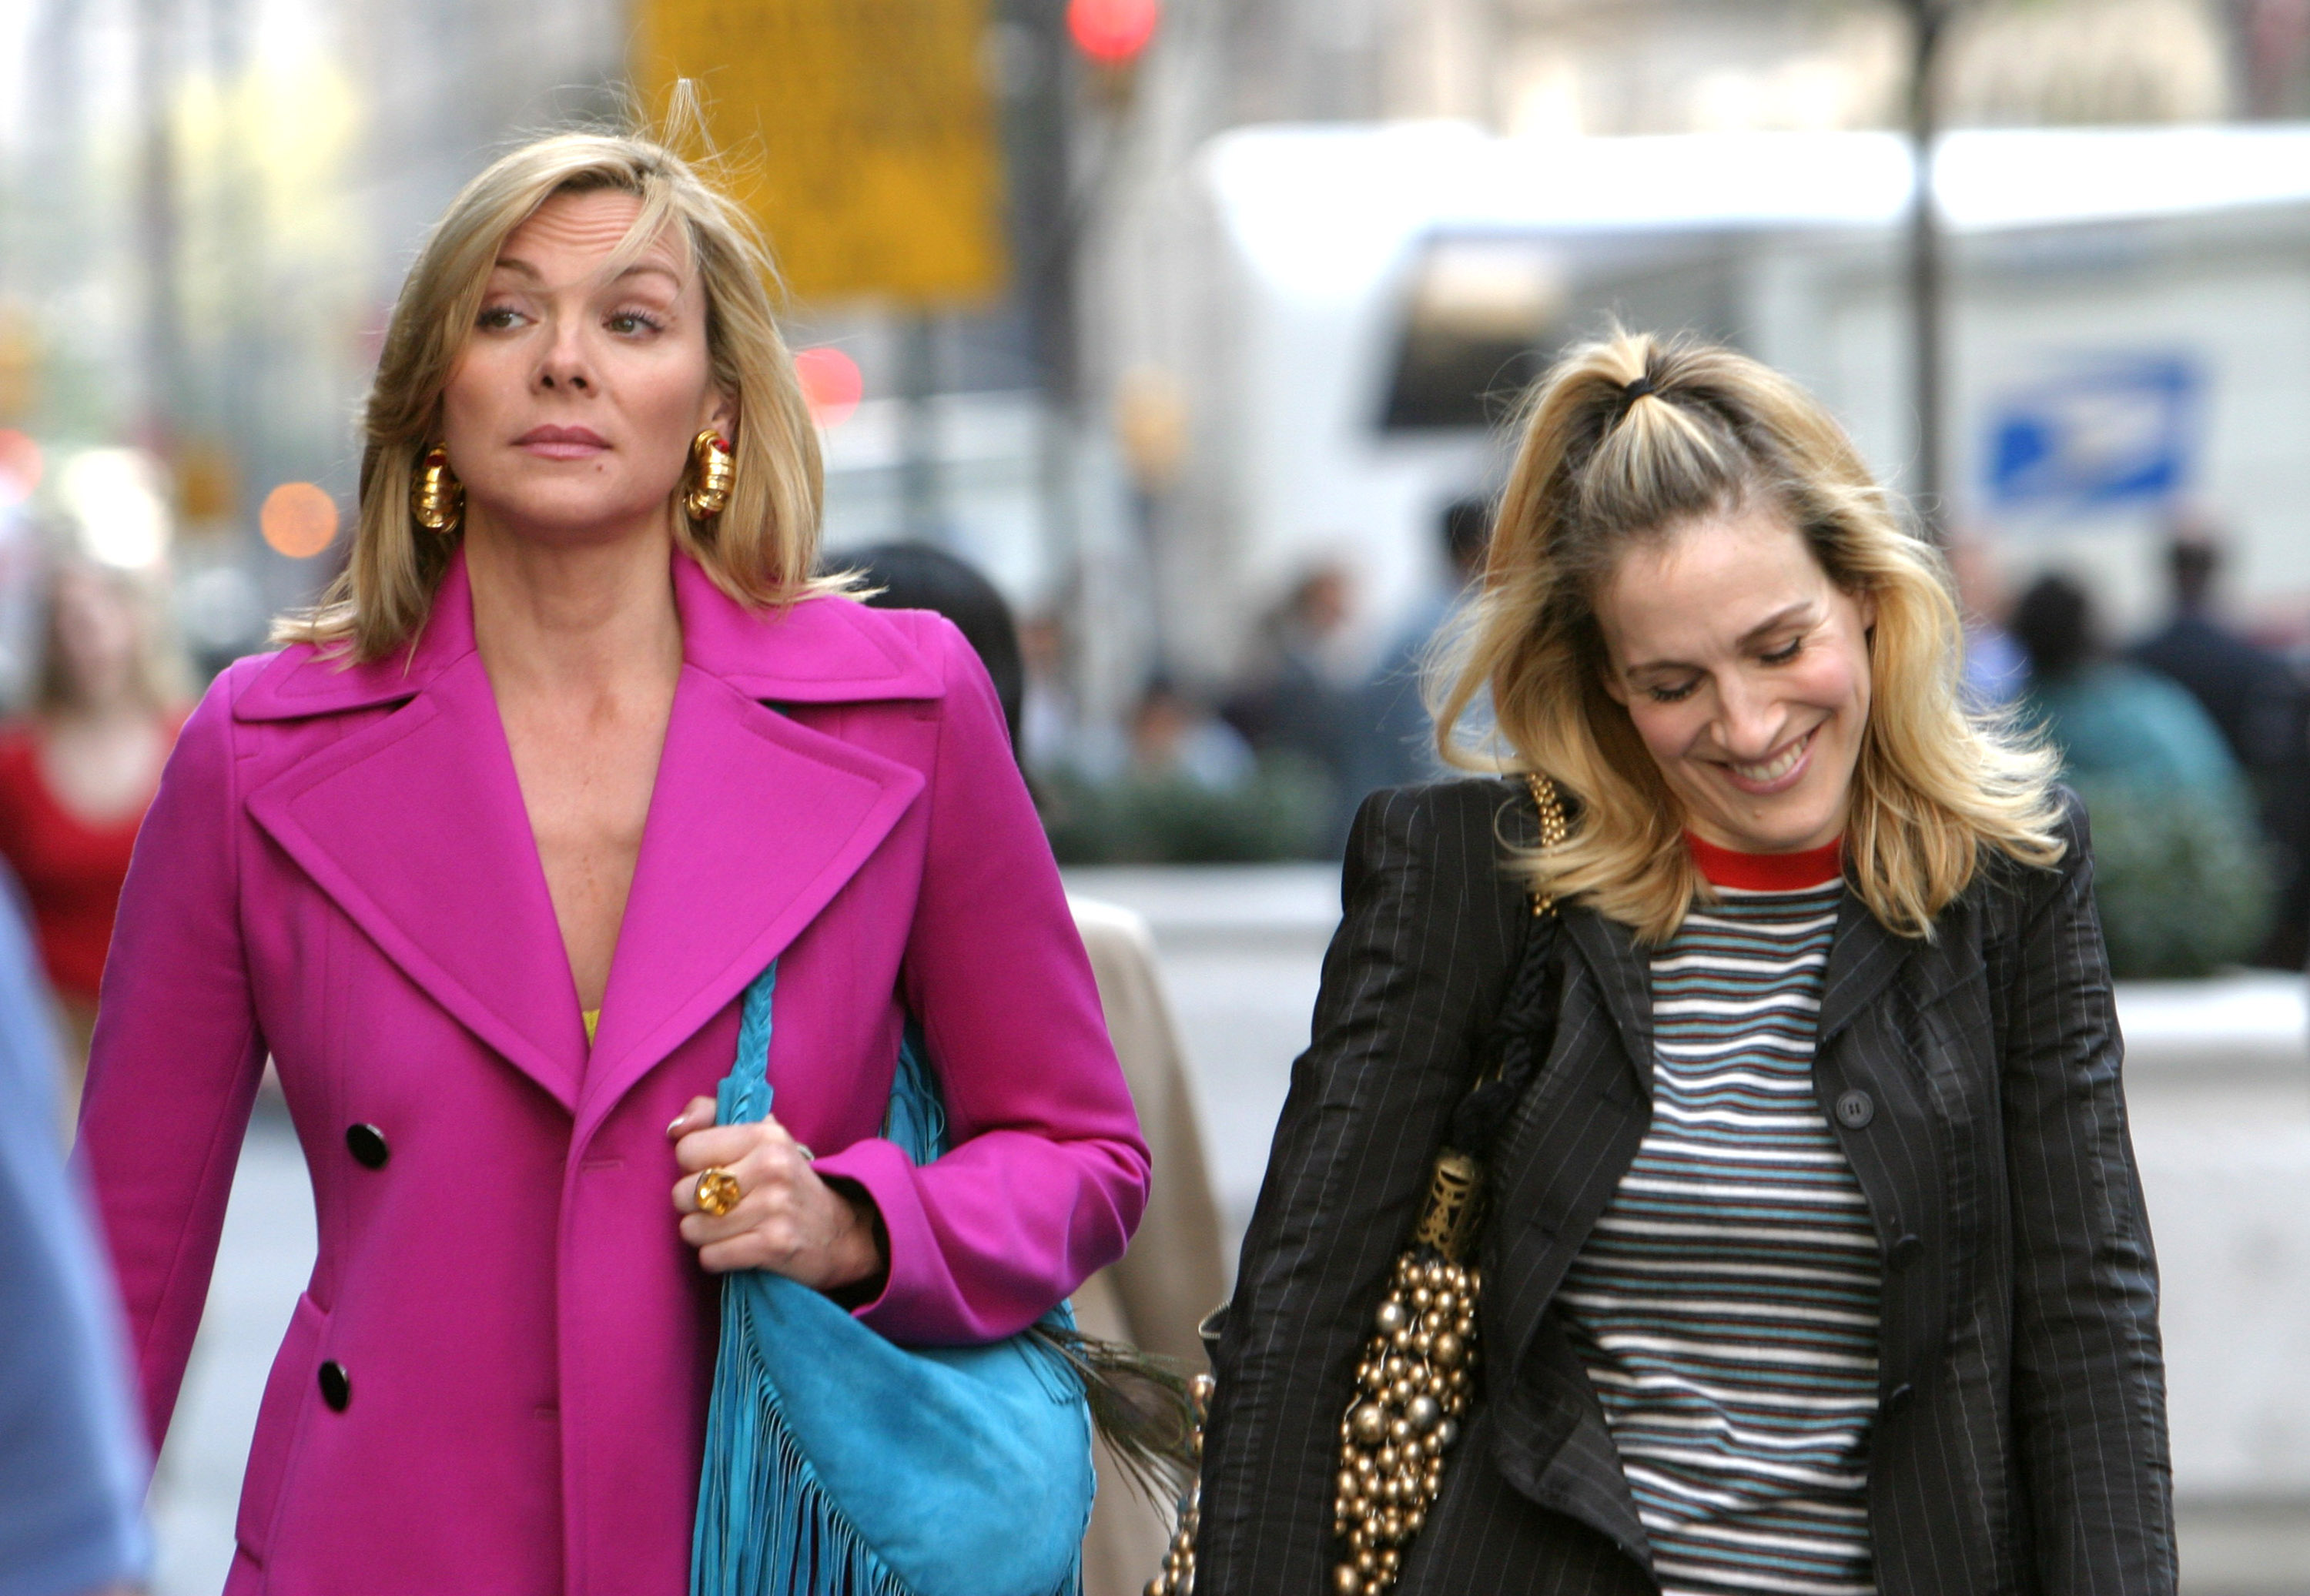 Kim Cattrall and Sarah Jessica Parker during Kim Cattrall and Sarah Jessica Parker On Location For "Sex And The City" at Saks Fifth Ave in New York, New York, United States. (Photo by James Devaney—WireImage)